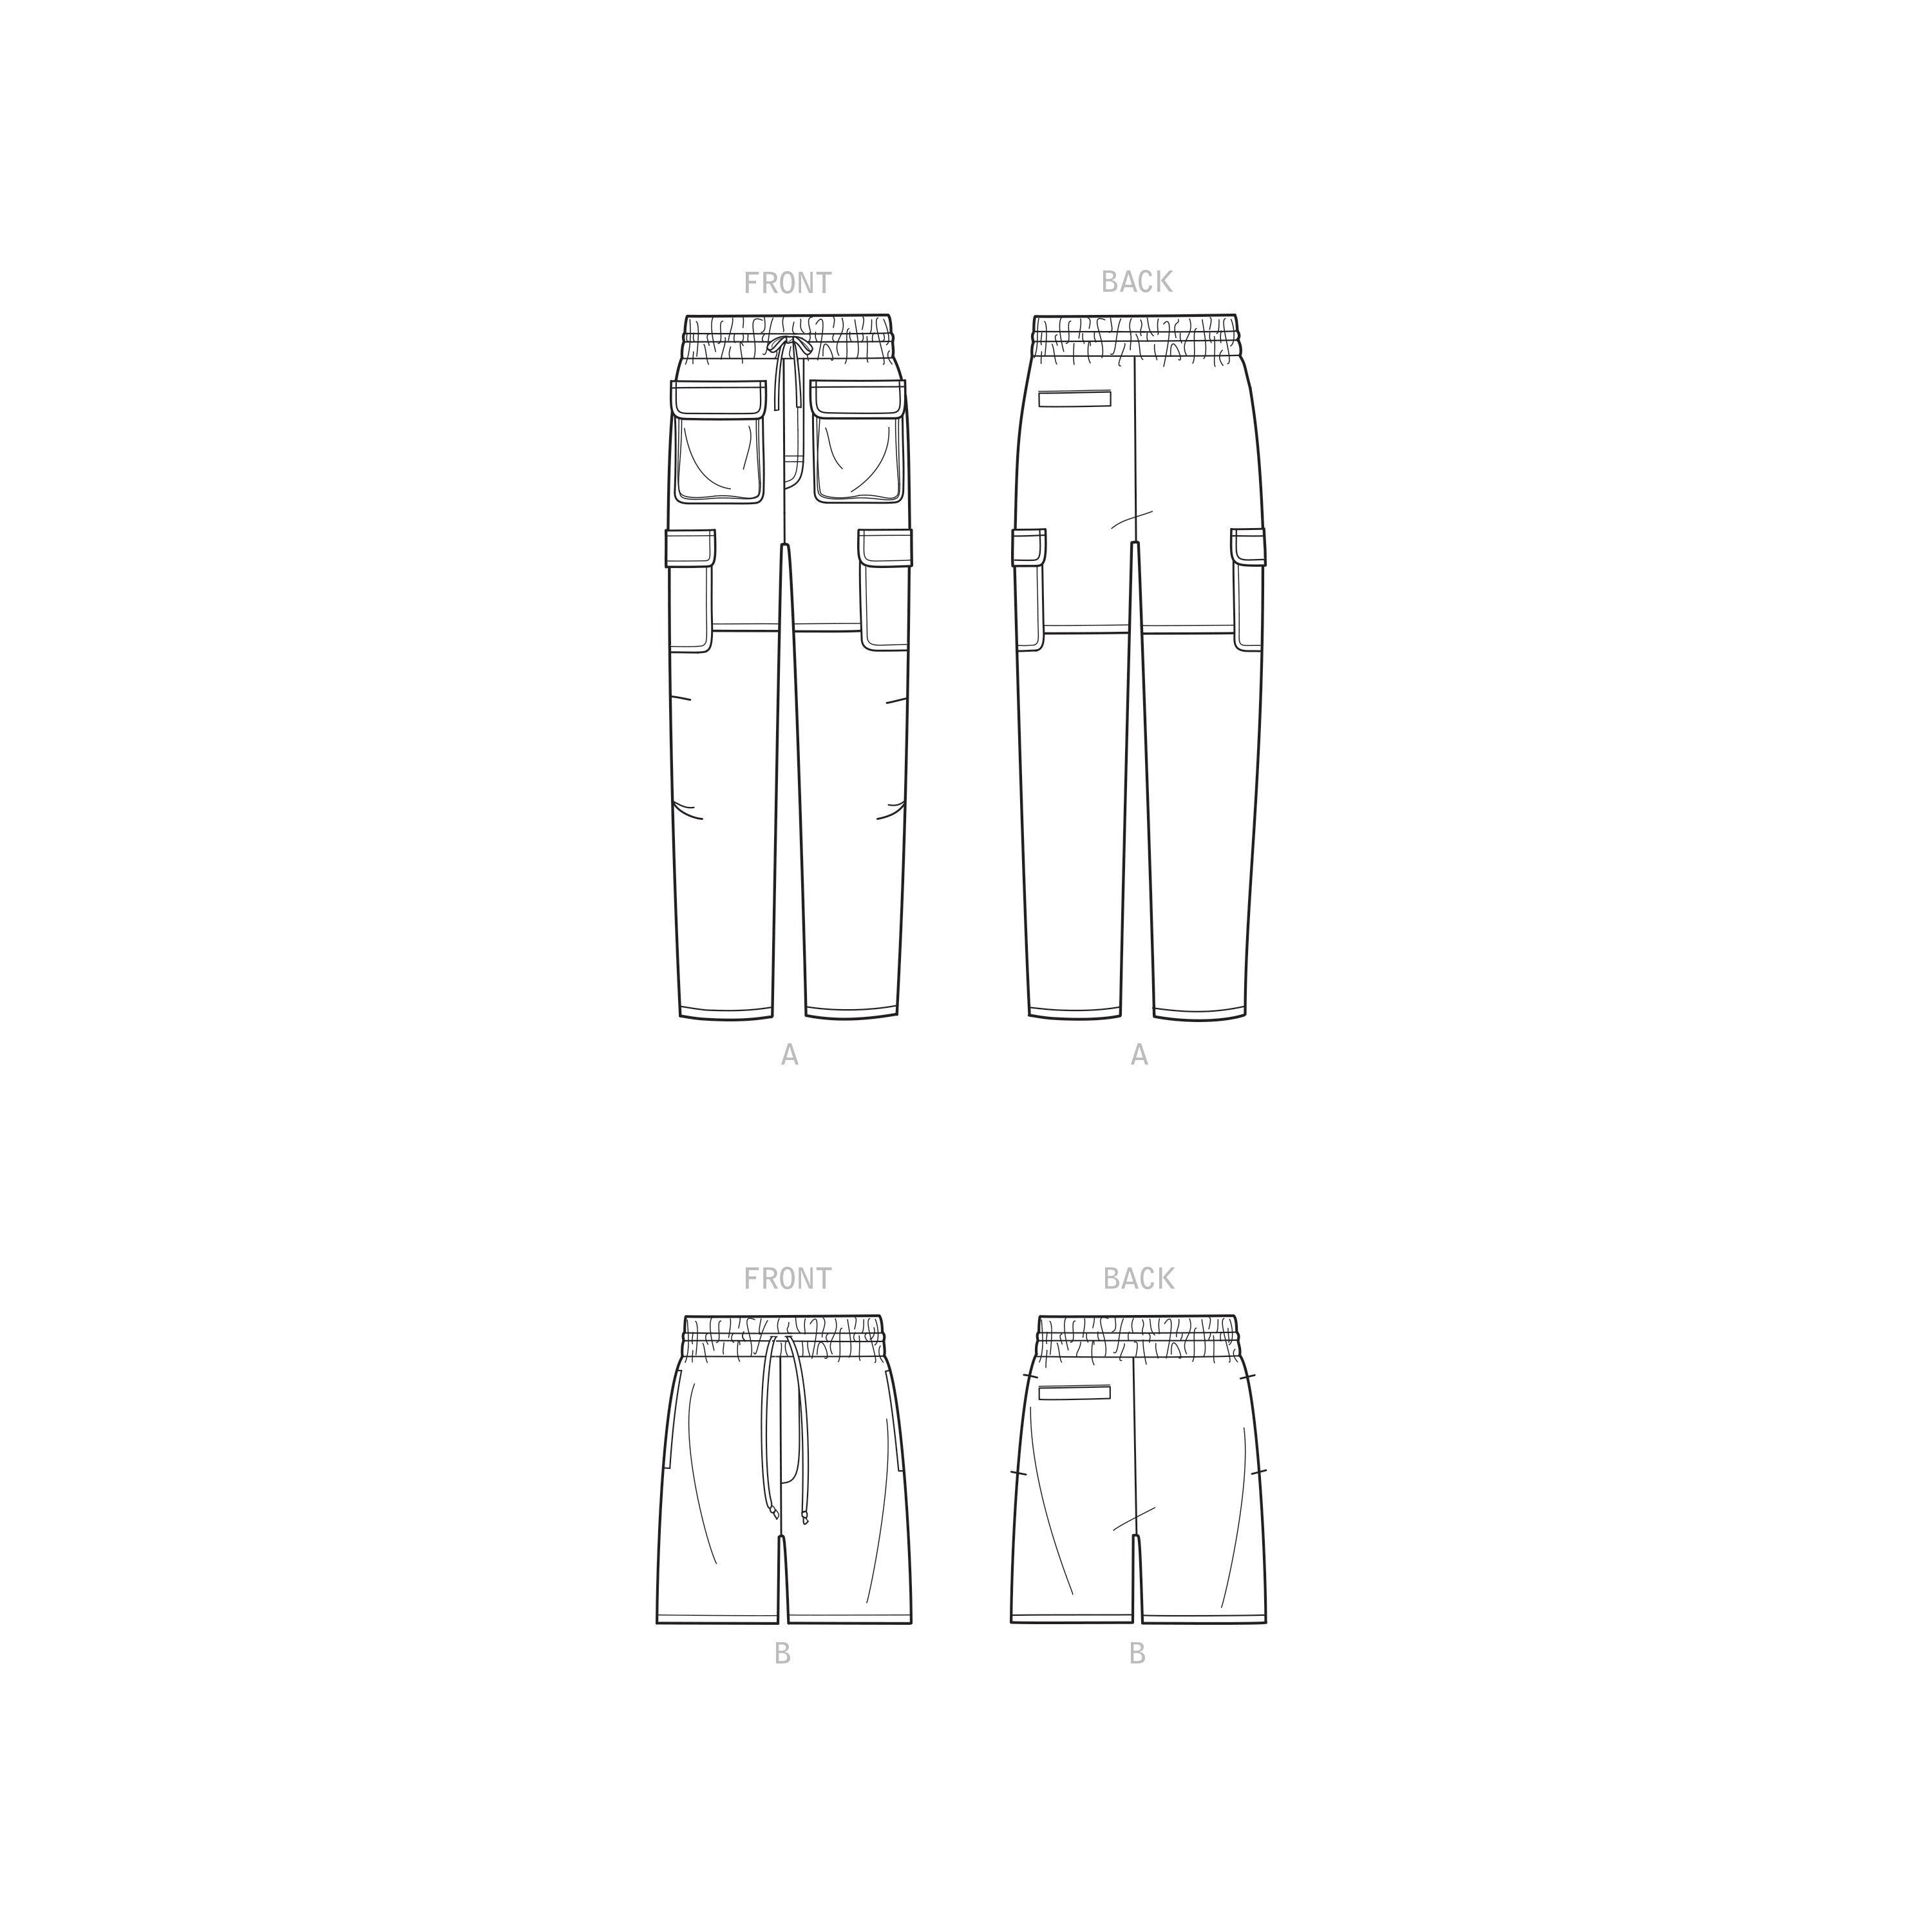 Simplicity Sewing Pattern S9338 Men's Pull-On Pants or Shorts from Jaycotts Sewing Supplies